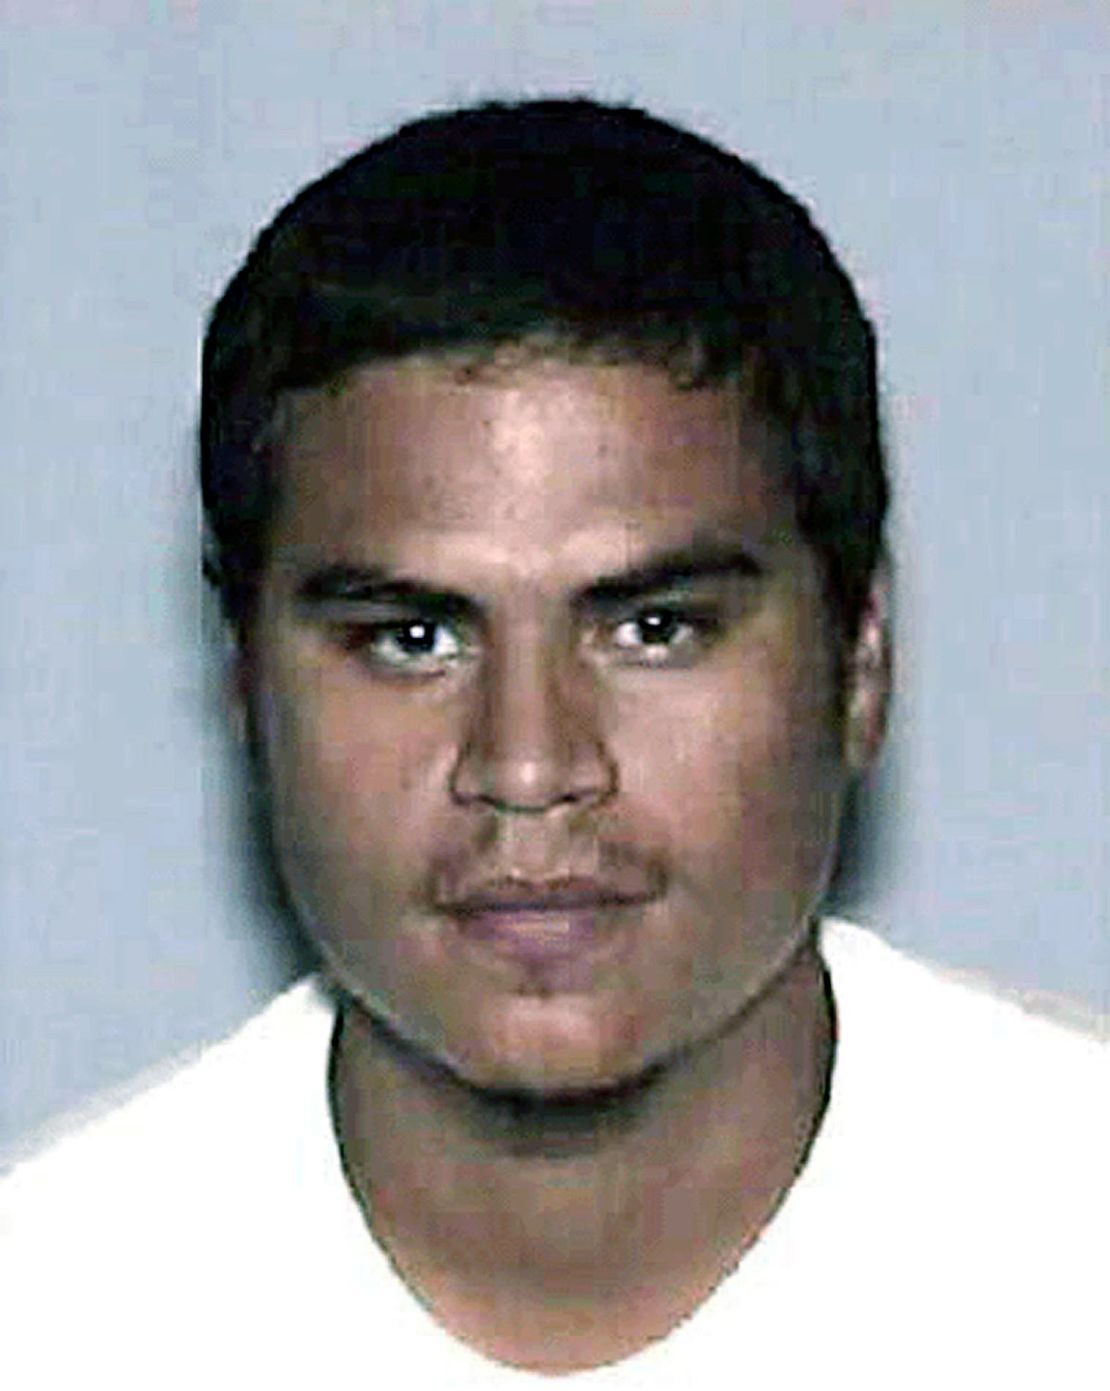 Jose Padilla, a U.S. citizen, was found guilty of conspiracy to provide material support to terrorism.